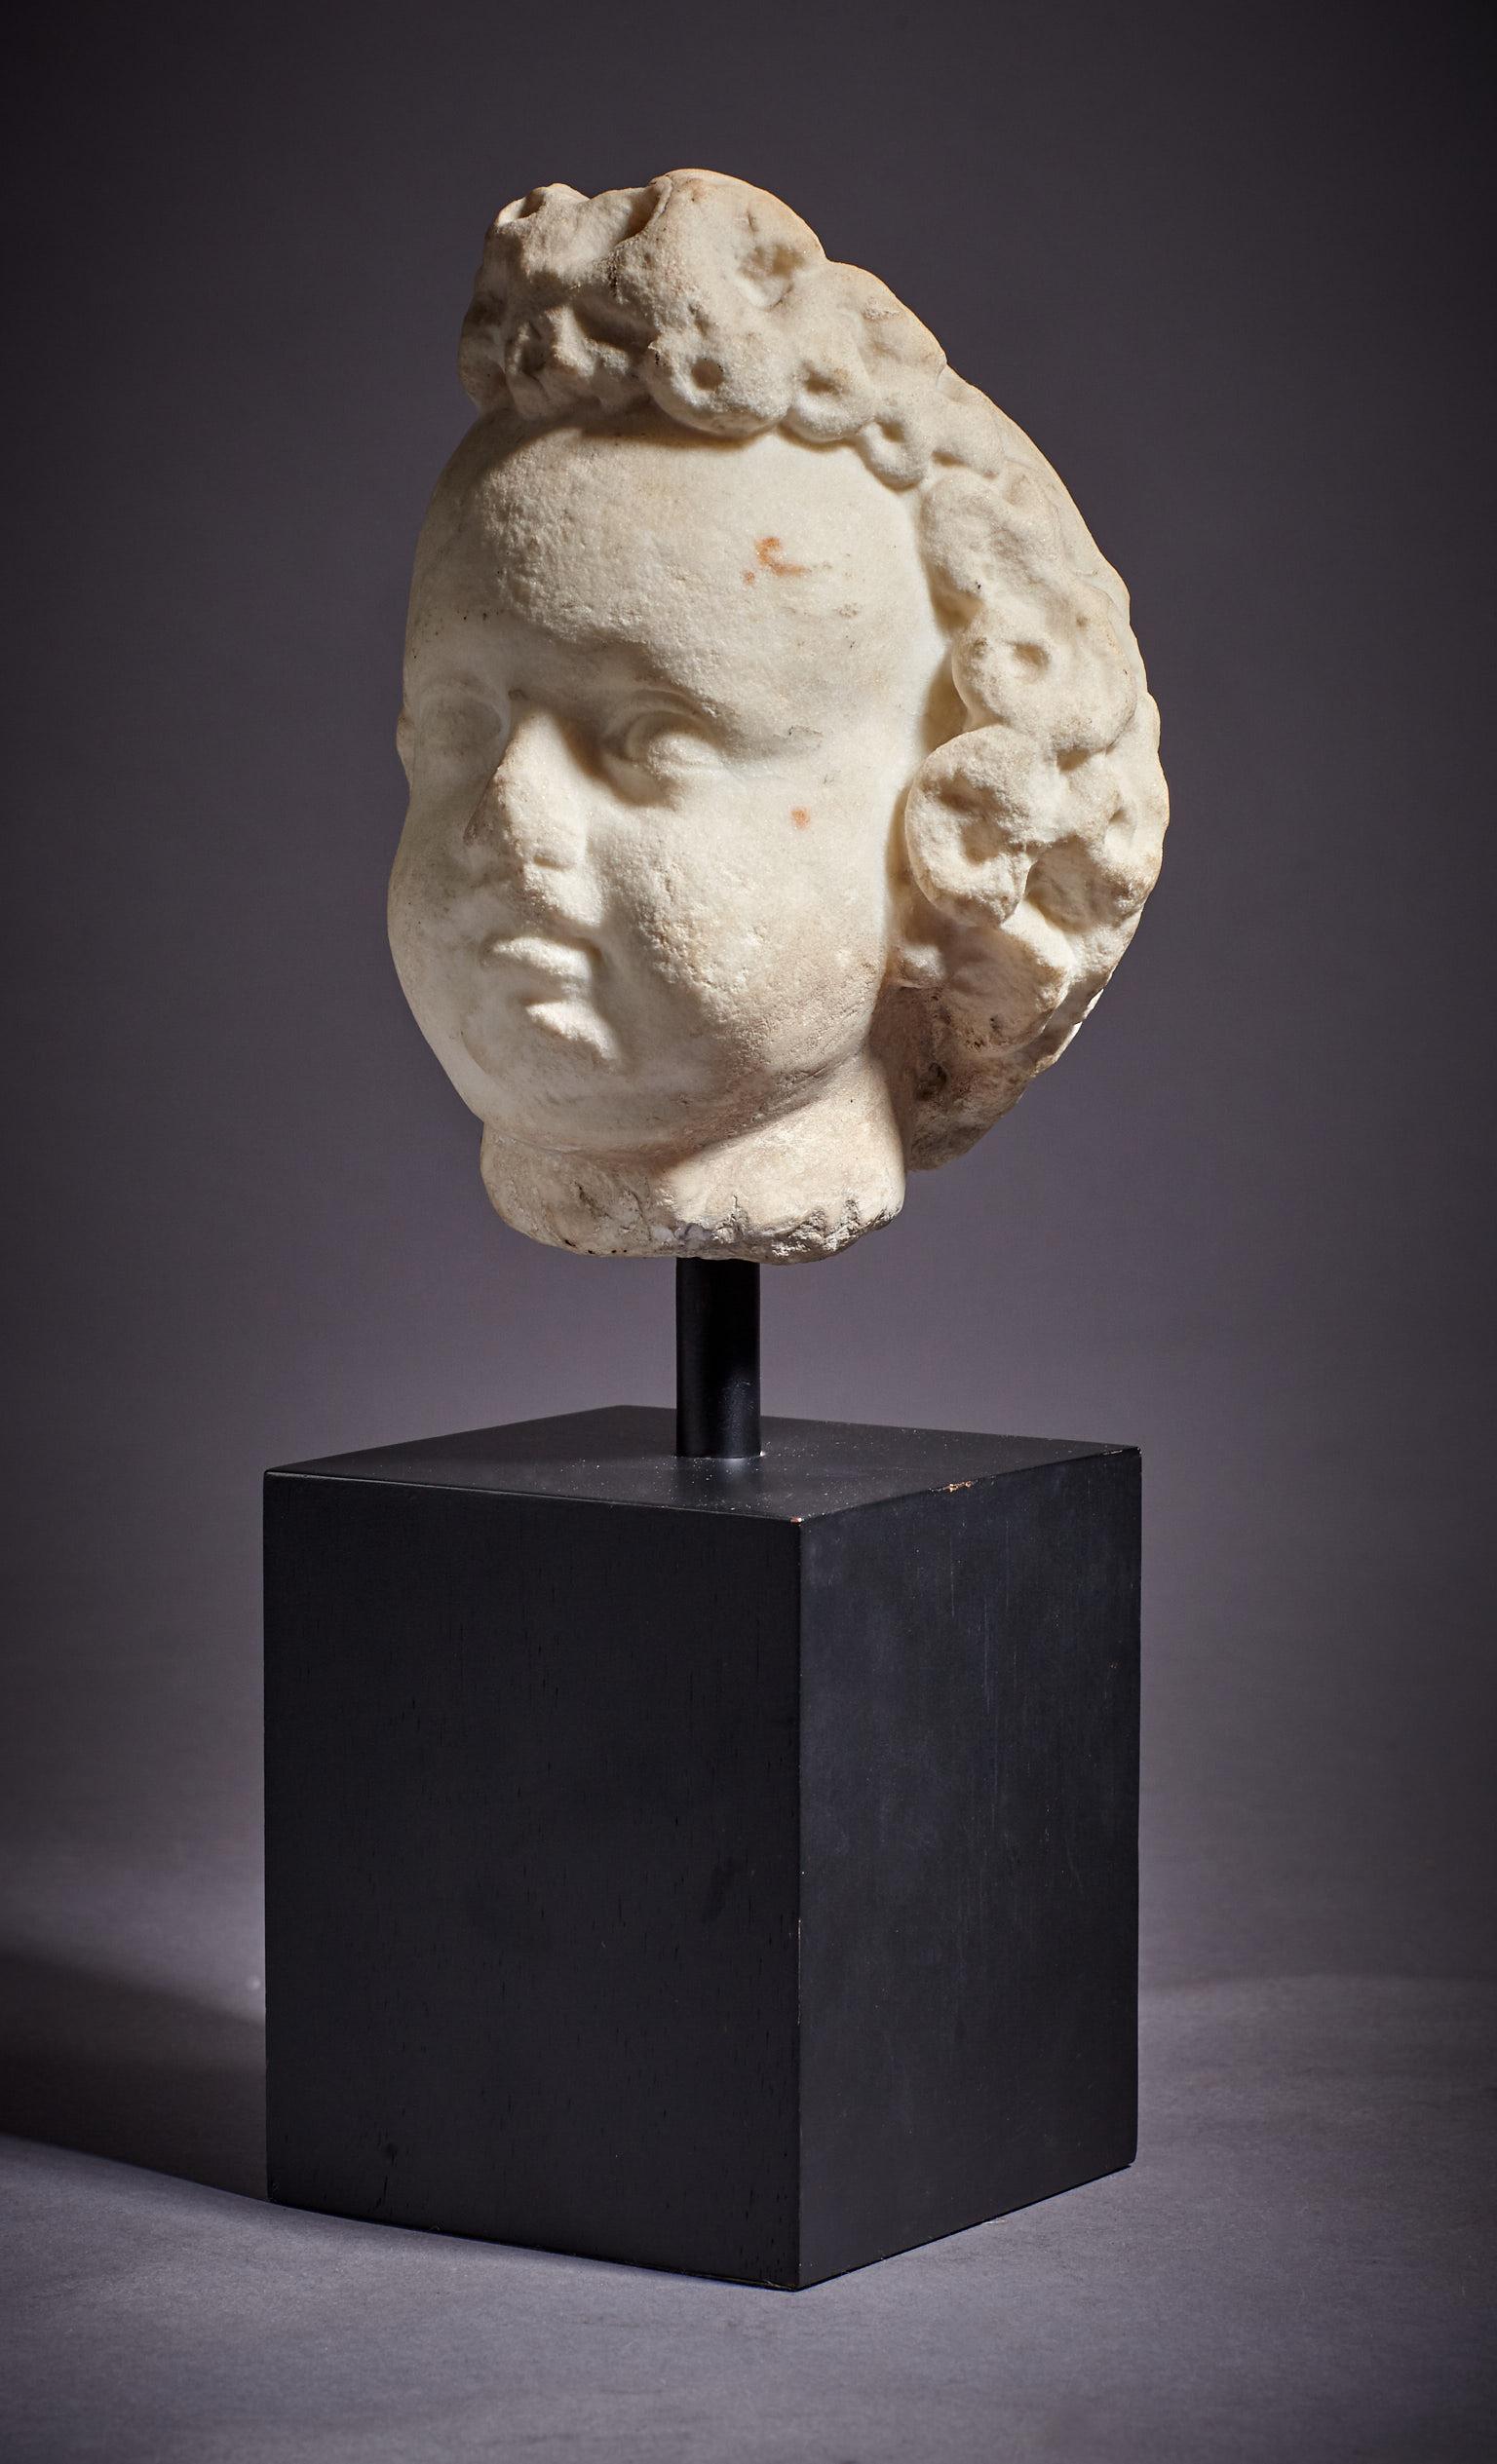 Small late 16th-early 17th century marble cherub head, Italian, circa 1600-1620

Finely sculpted in the round in high relief, of a cherub with curling hair.

Mounted on modern wooden base, mounted height is 14.5